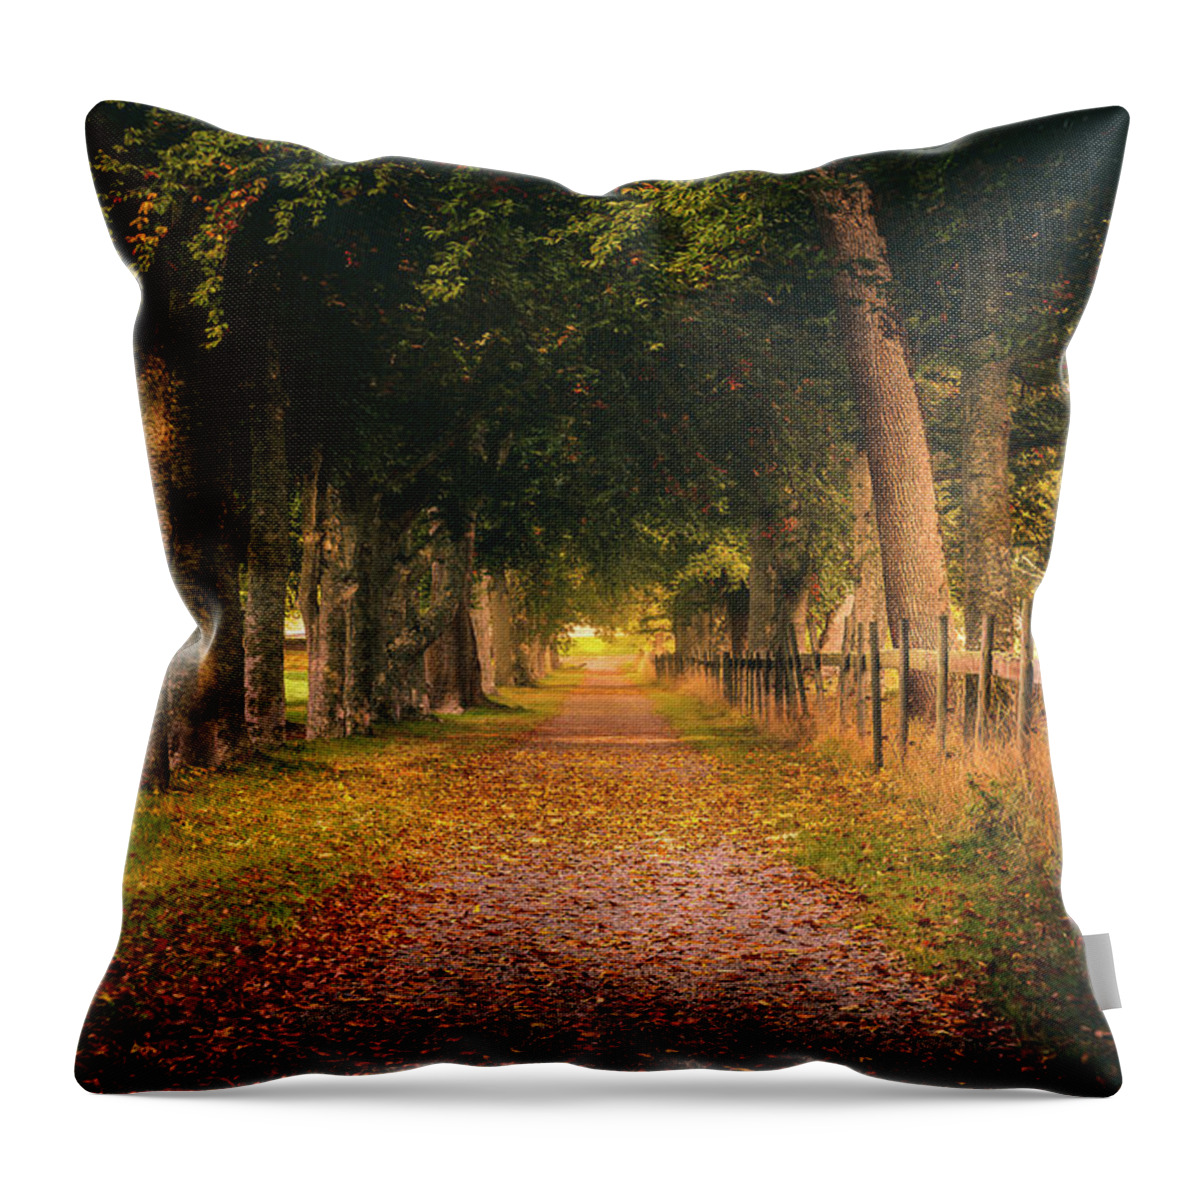 Autumn Throw Pillow featuring the photograph Autumn Country Road by Nicklas Gustafsson